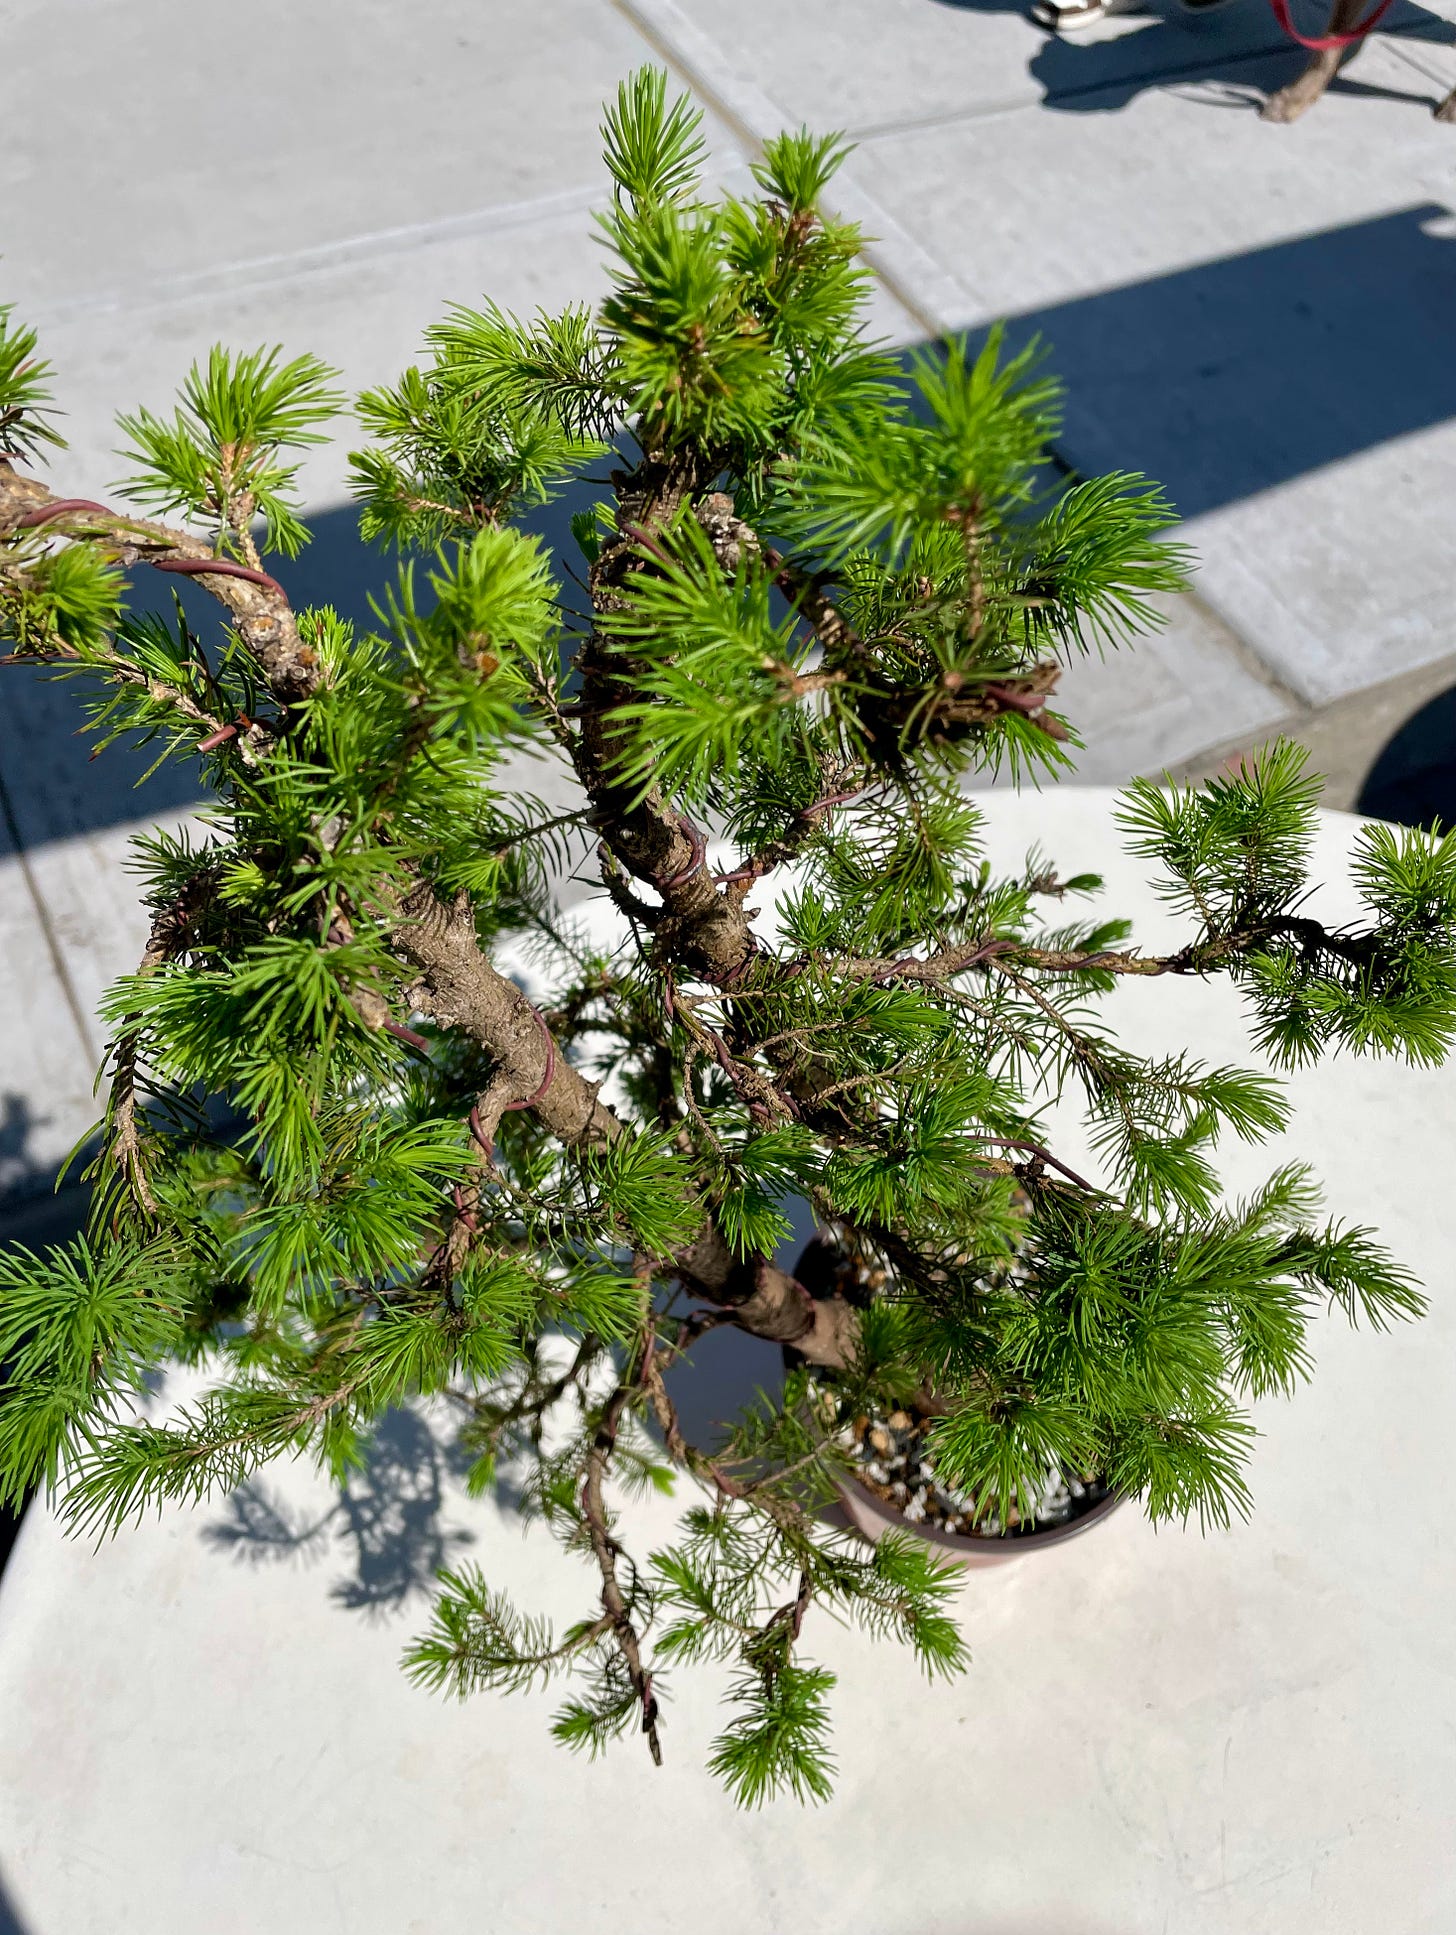 ID: Photo of repotted spruce tree from above